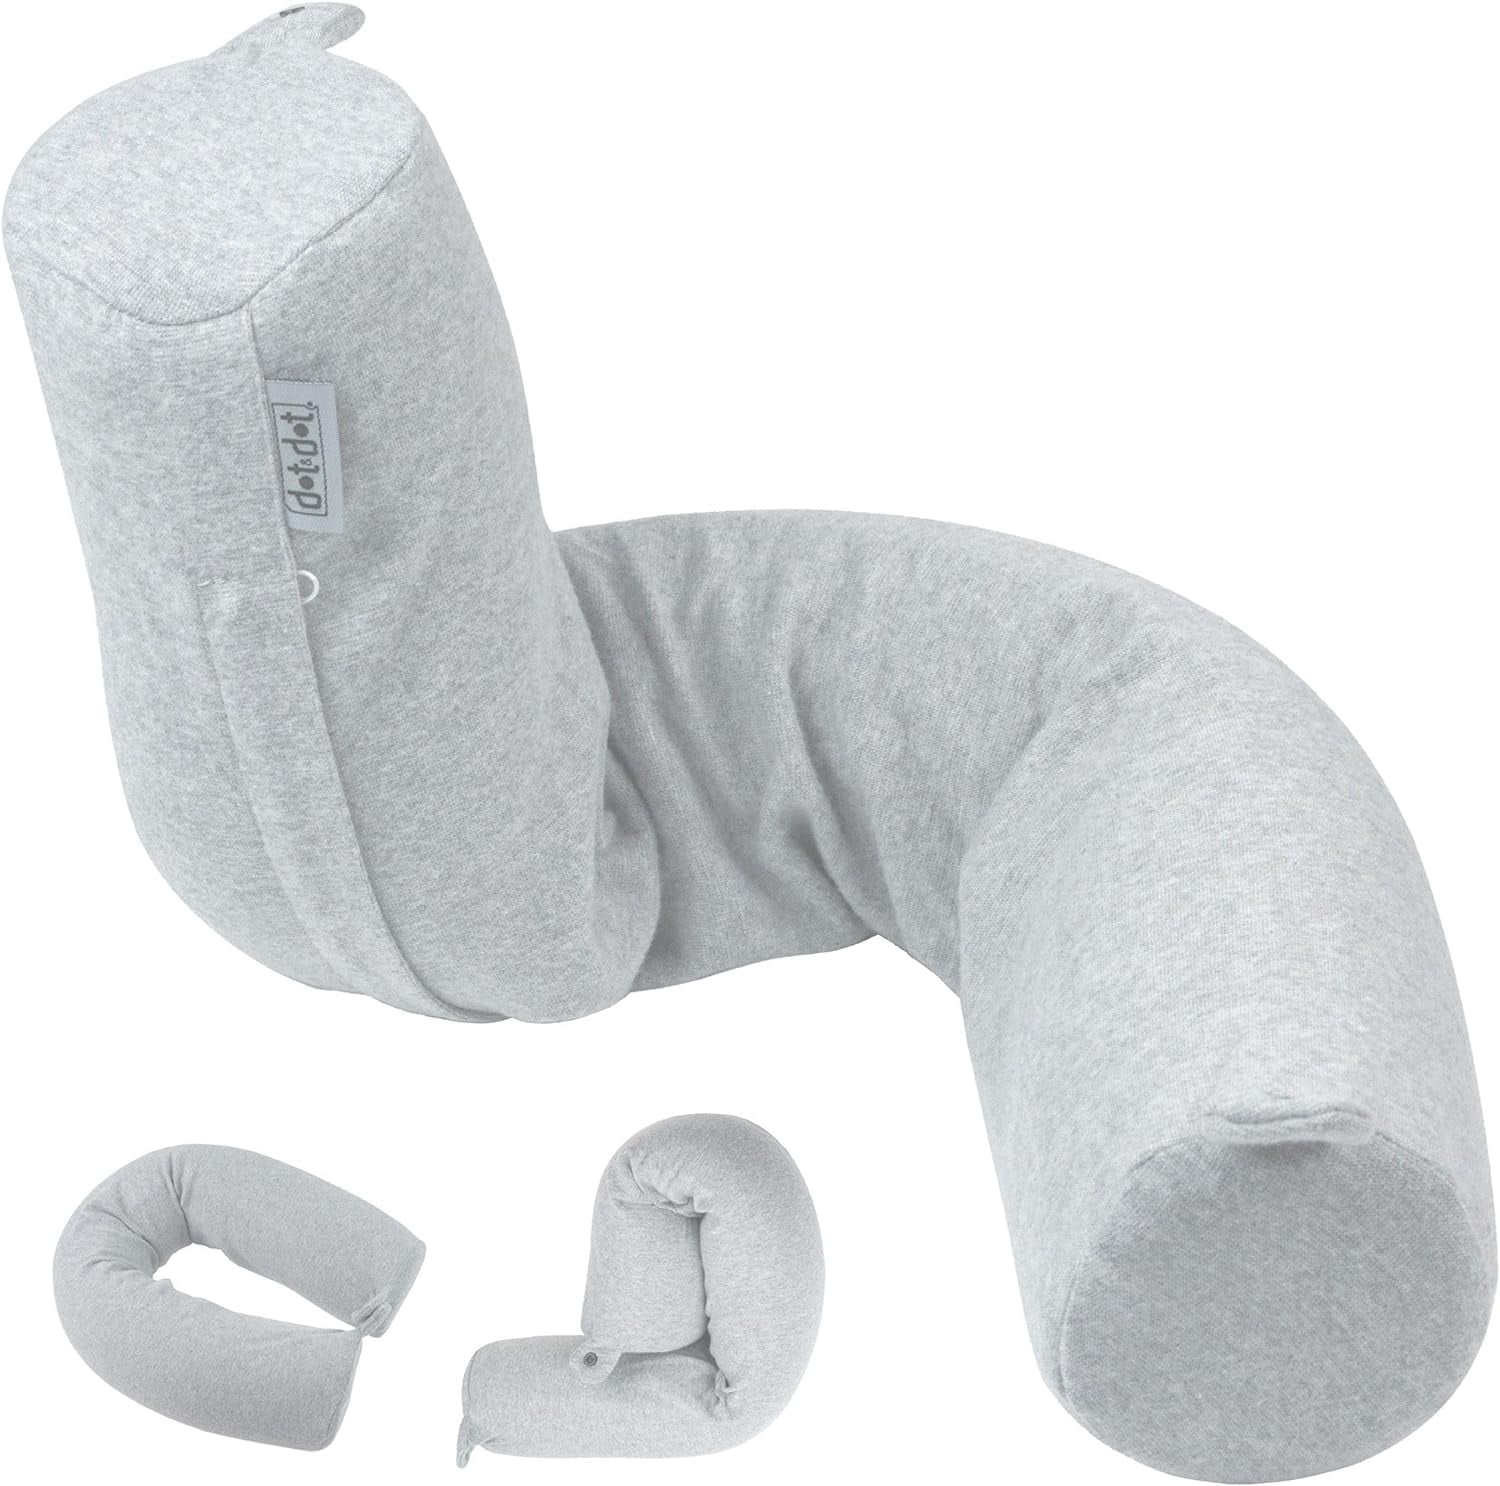 Vertall Travel Pillow Adjustable Memory Foam for Neck, Chin, Back, and Leg  Support –